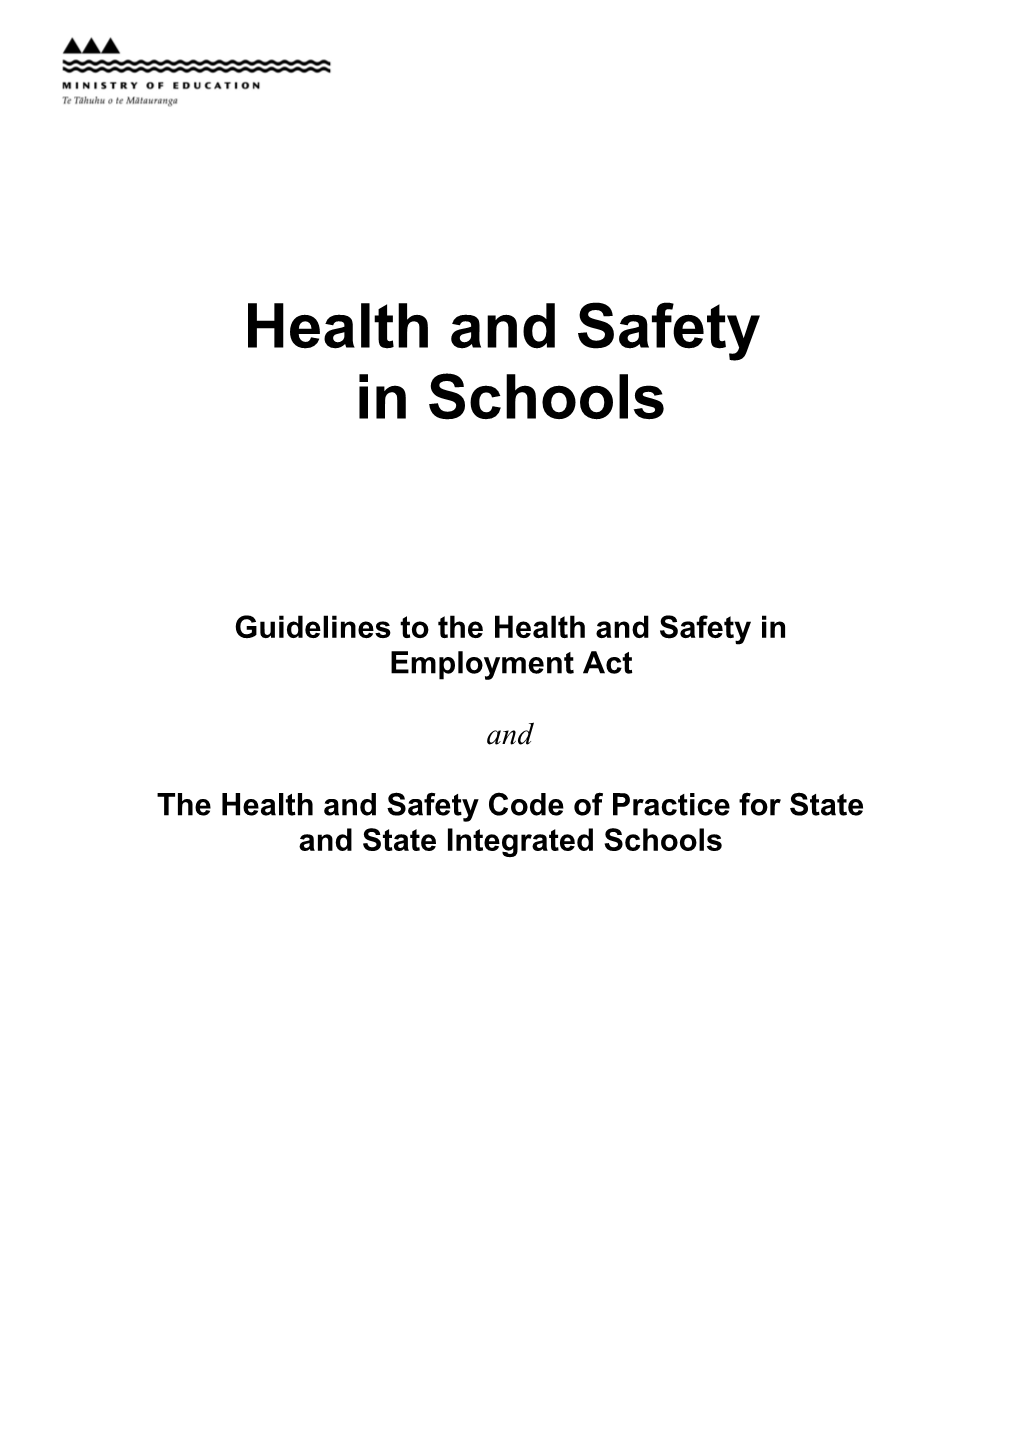 Health and Safety in Schools